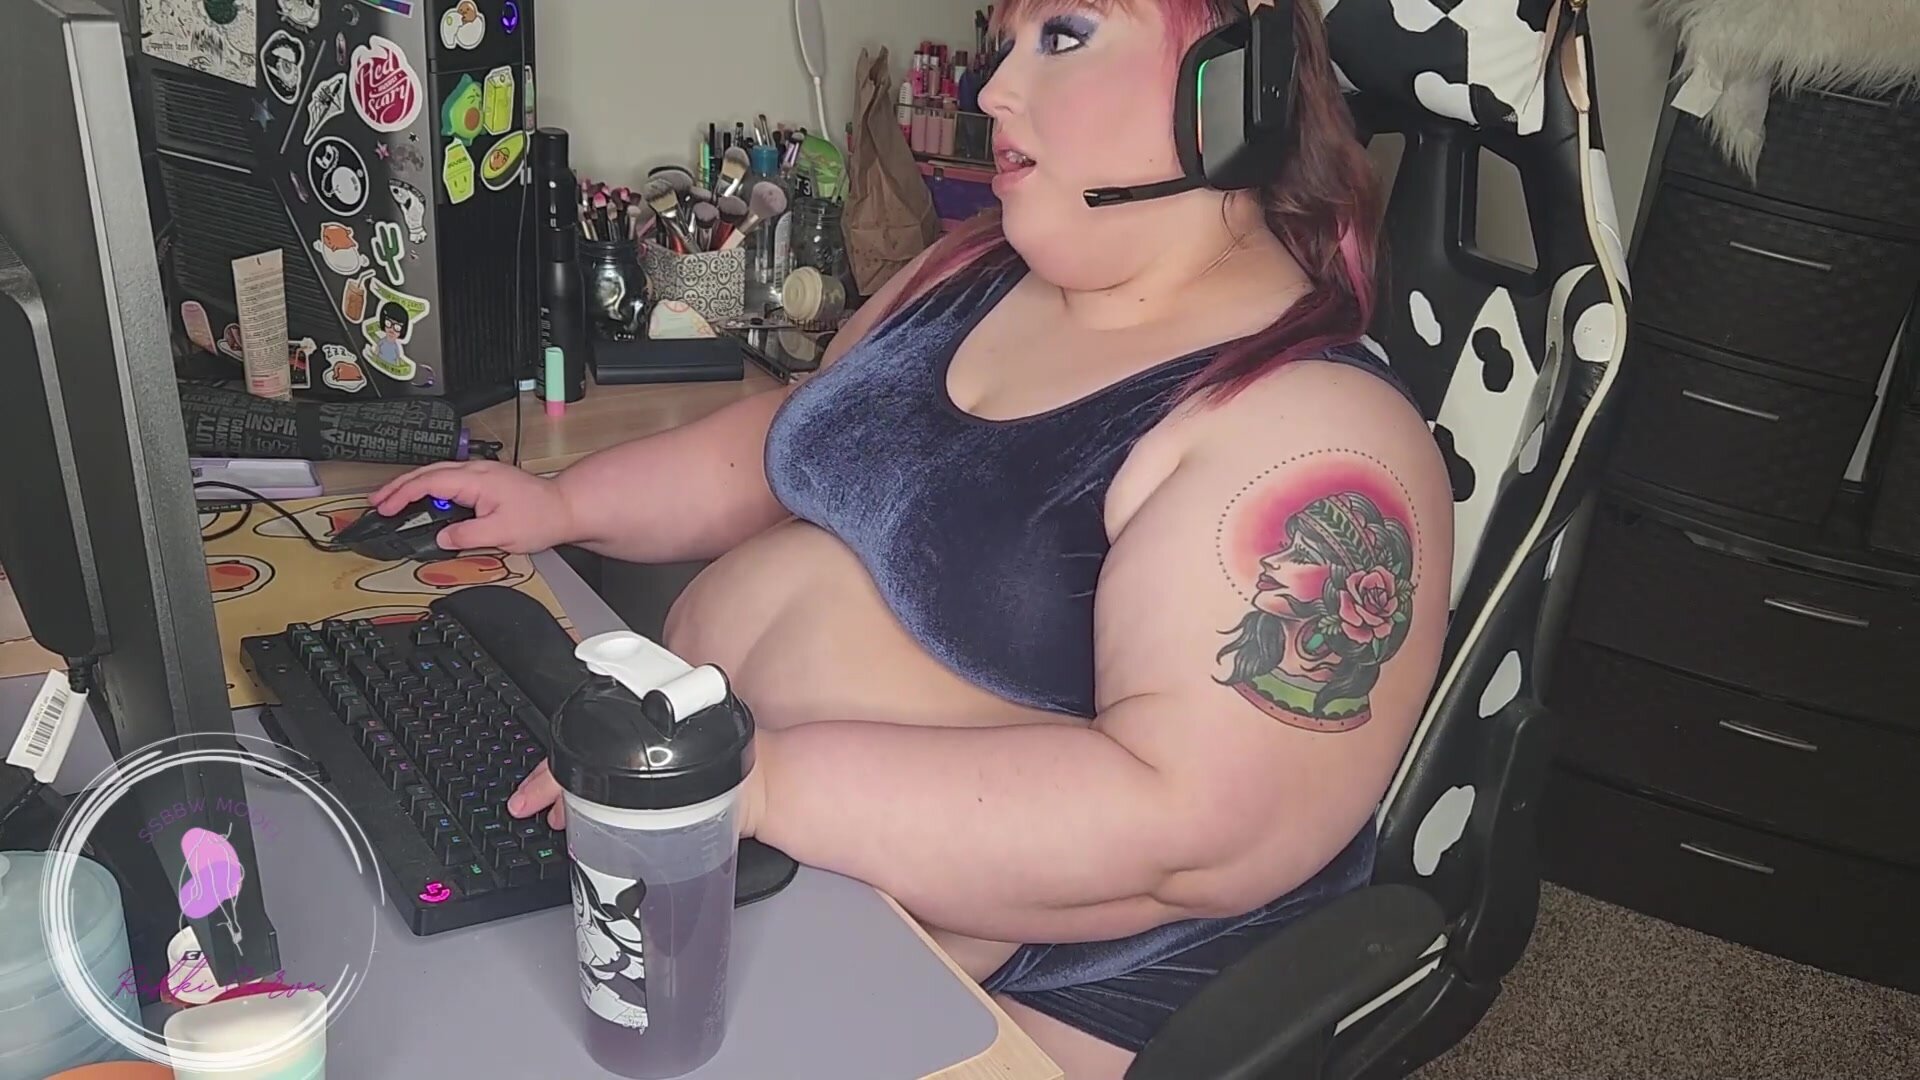 bbw playing game on chair